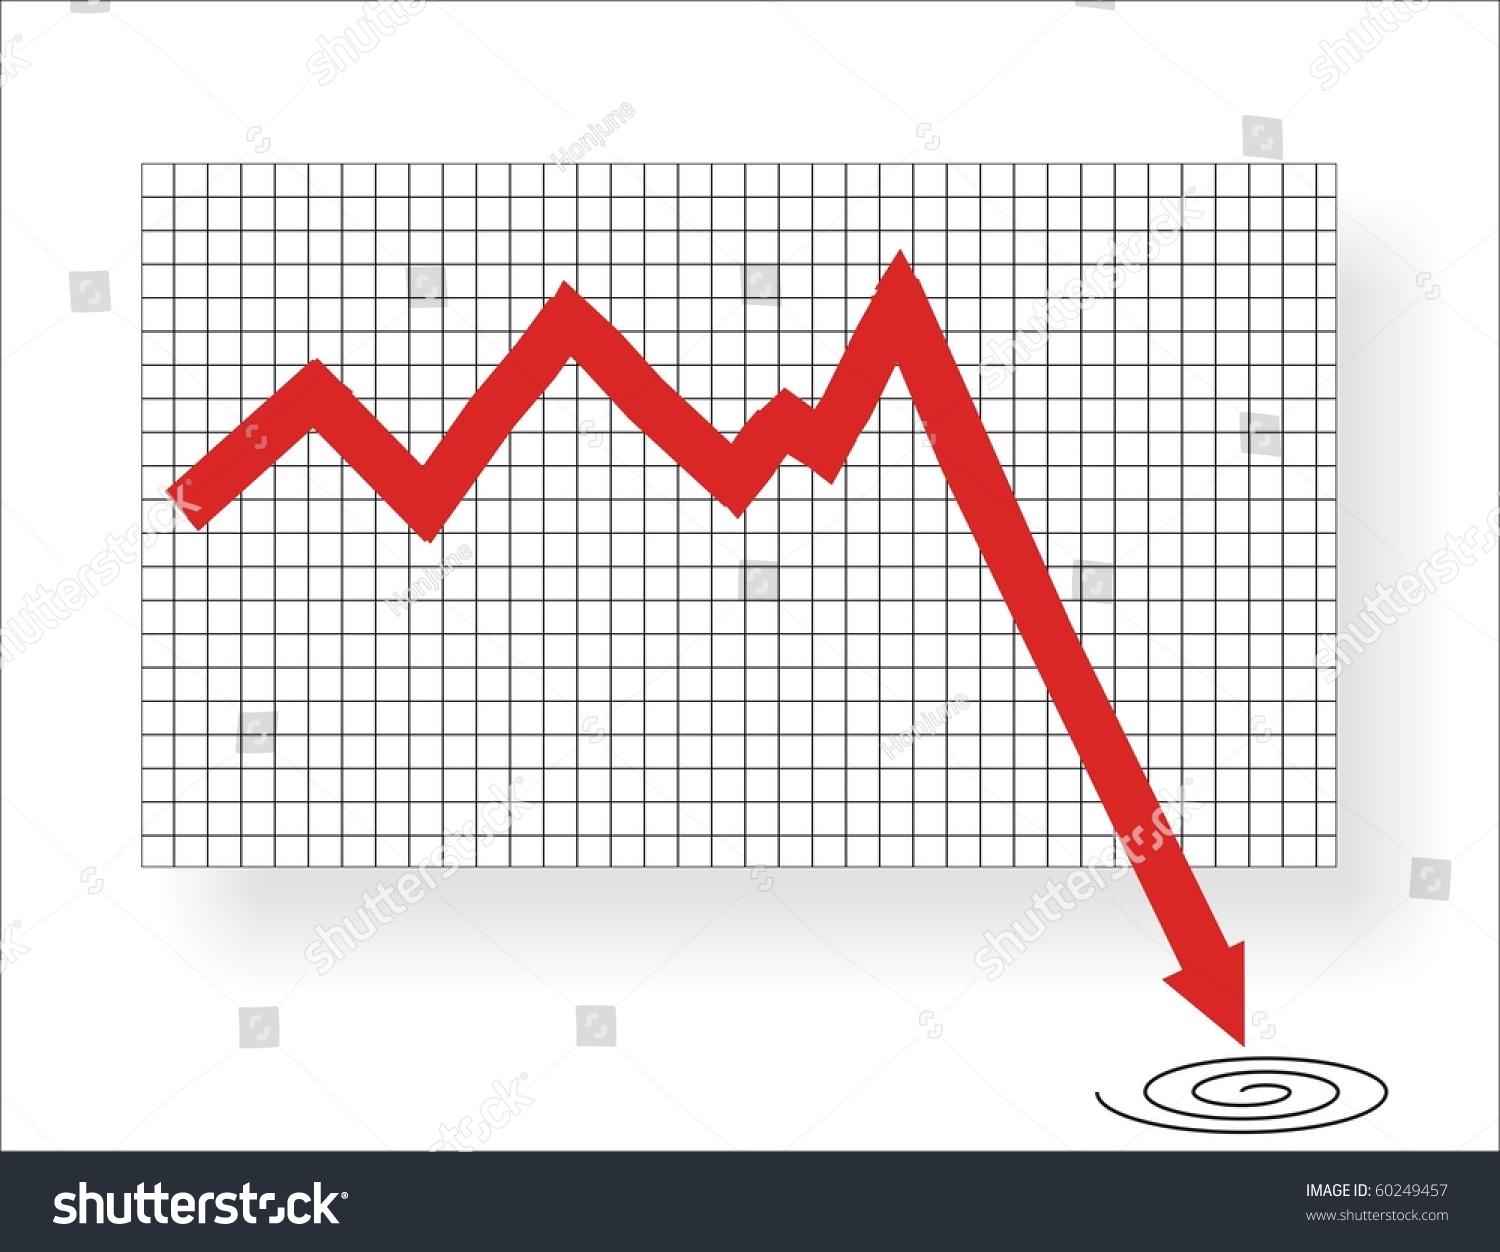 Market Going Down On Chart Illustration And Concept 60249457